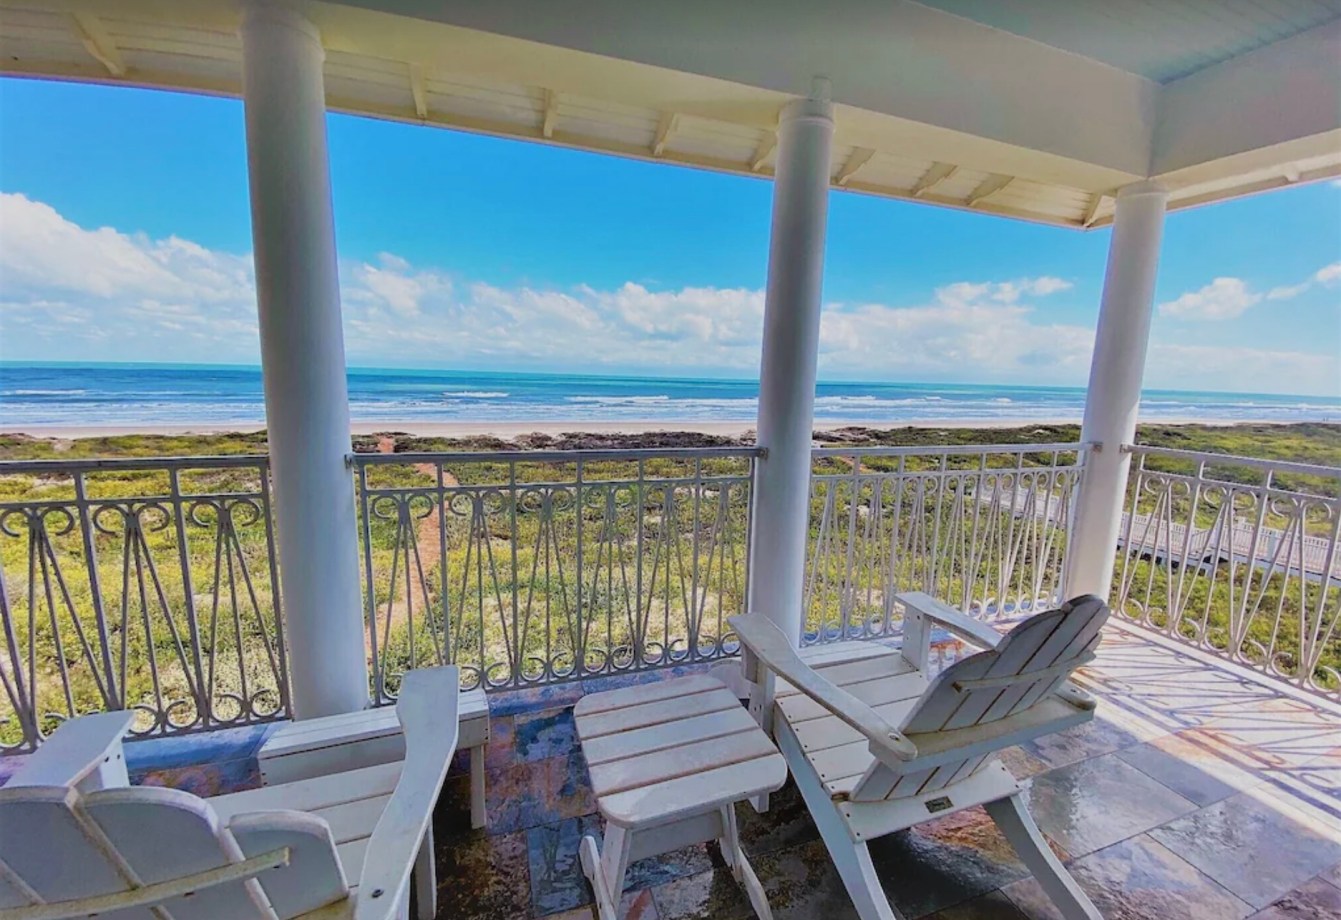 View of ocean on South Padre Island from Sapphire Bungalow Vrbo Rental